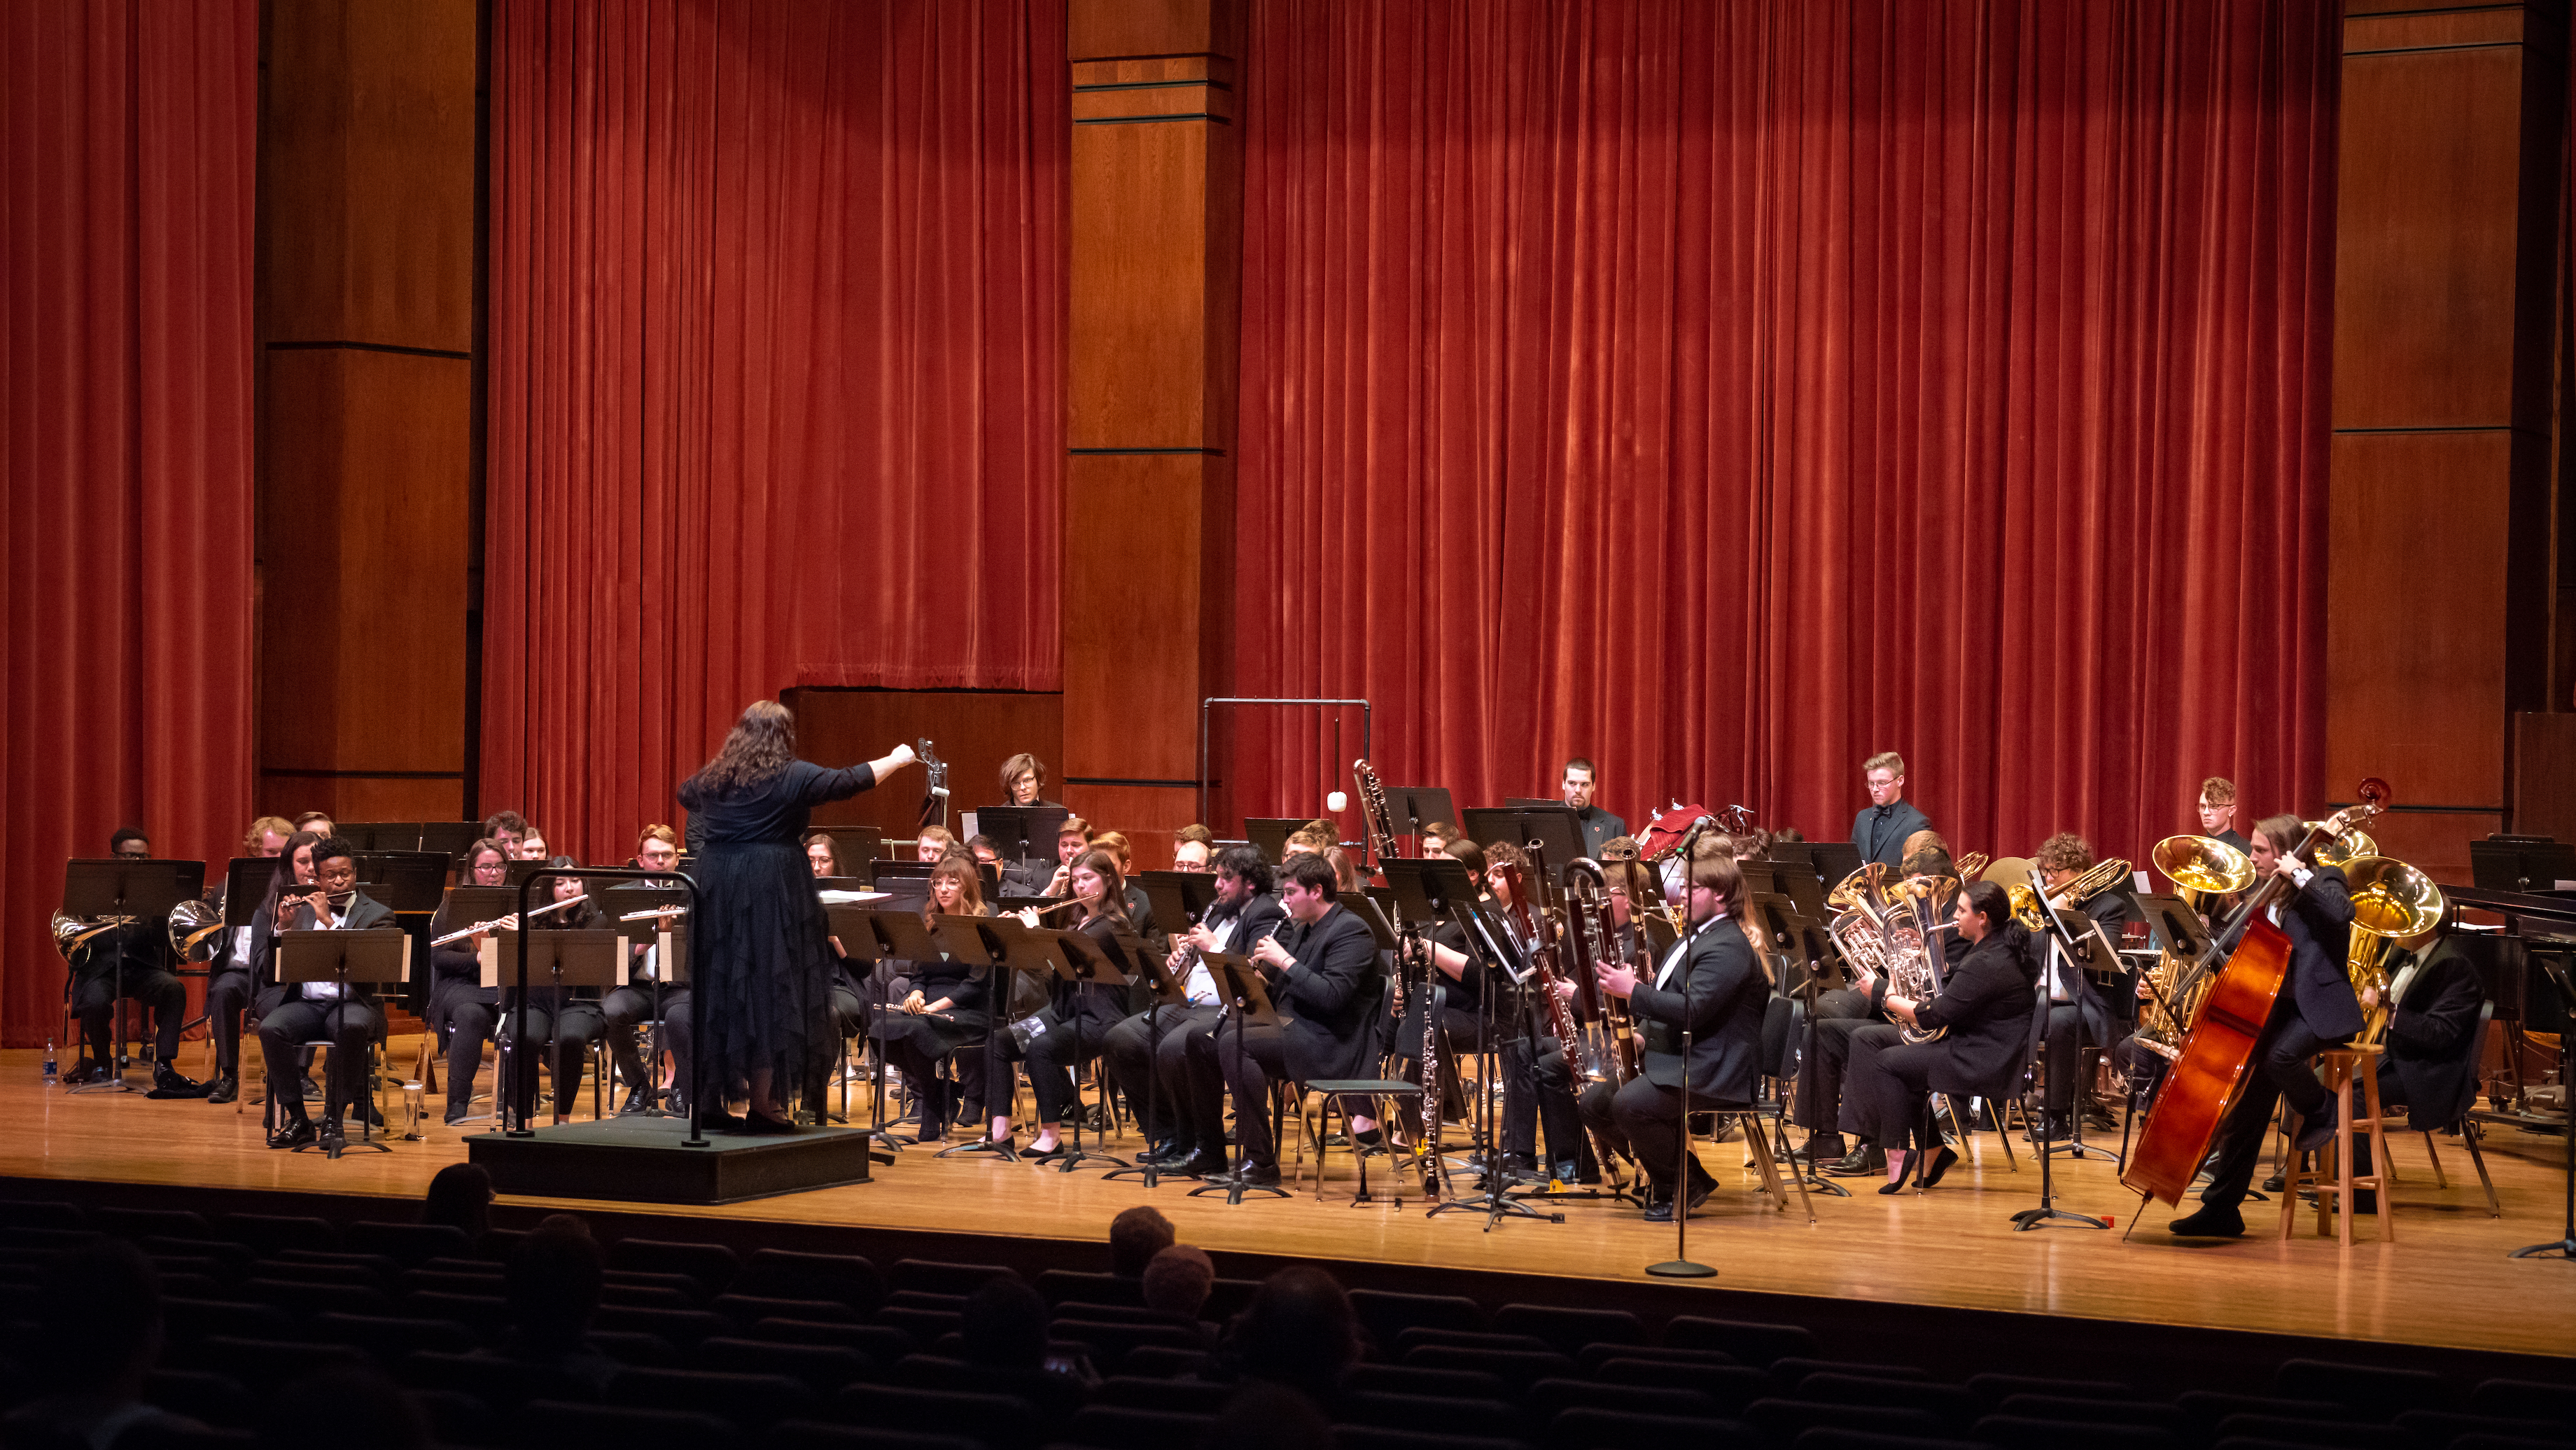 Symphonic Winds band on stage with conductor in front of the ensemble